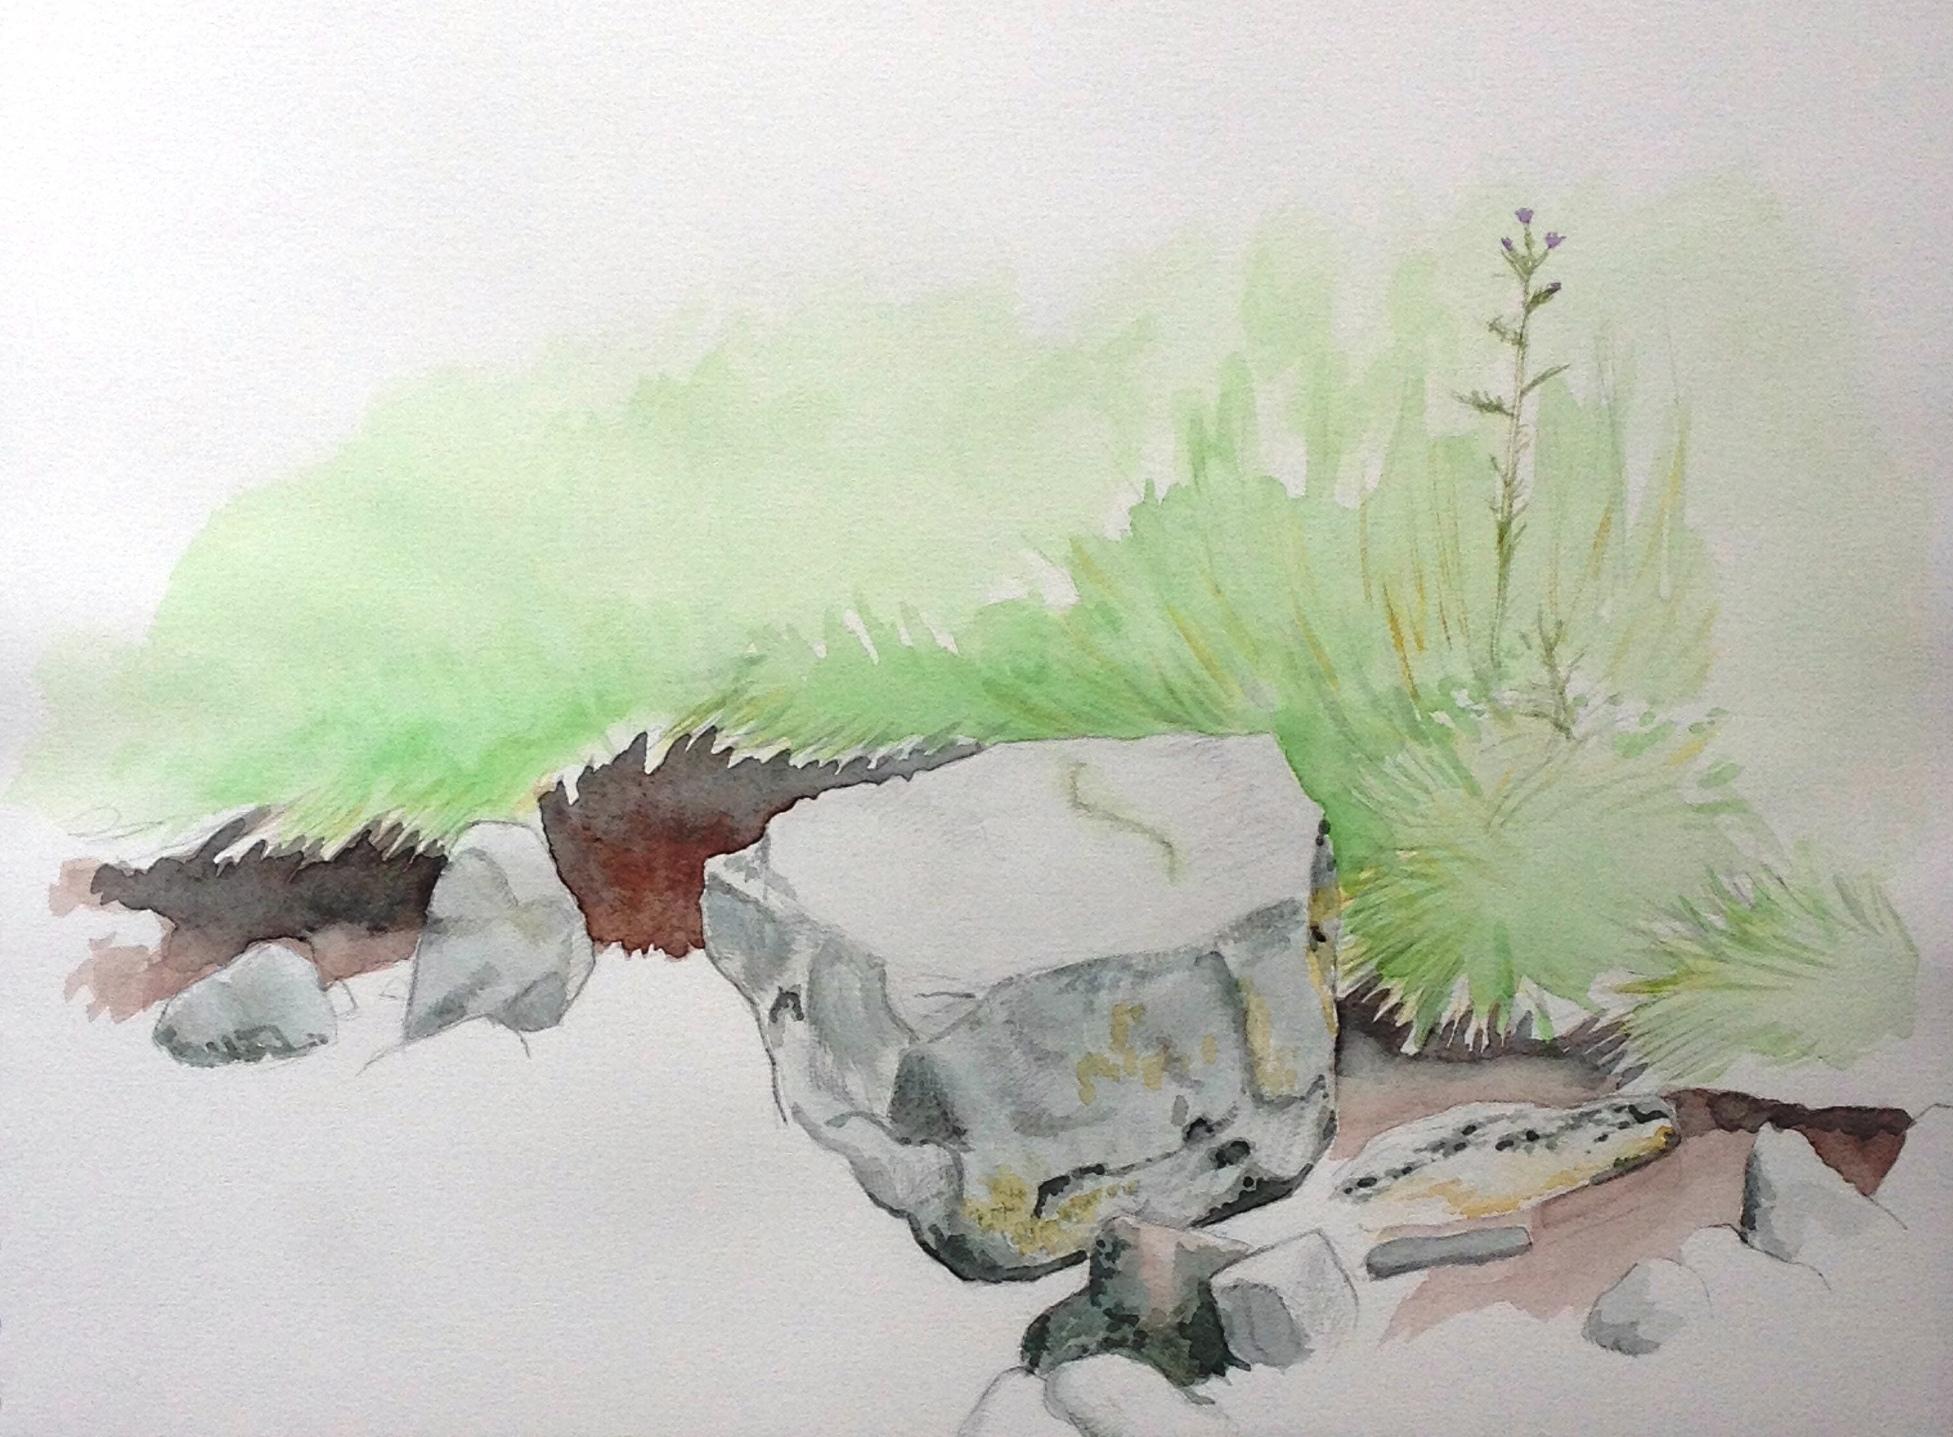 'Rocks and river bank, Tretower road' watercolour and pencil on paper (June 2015)